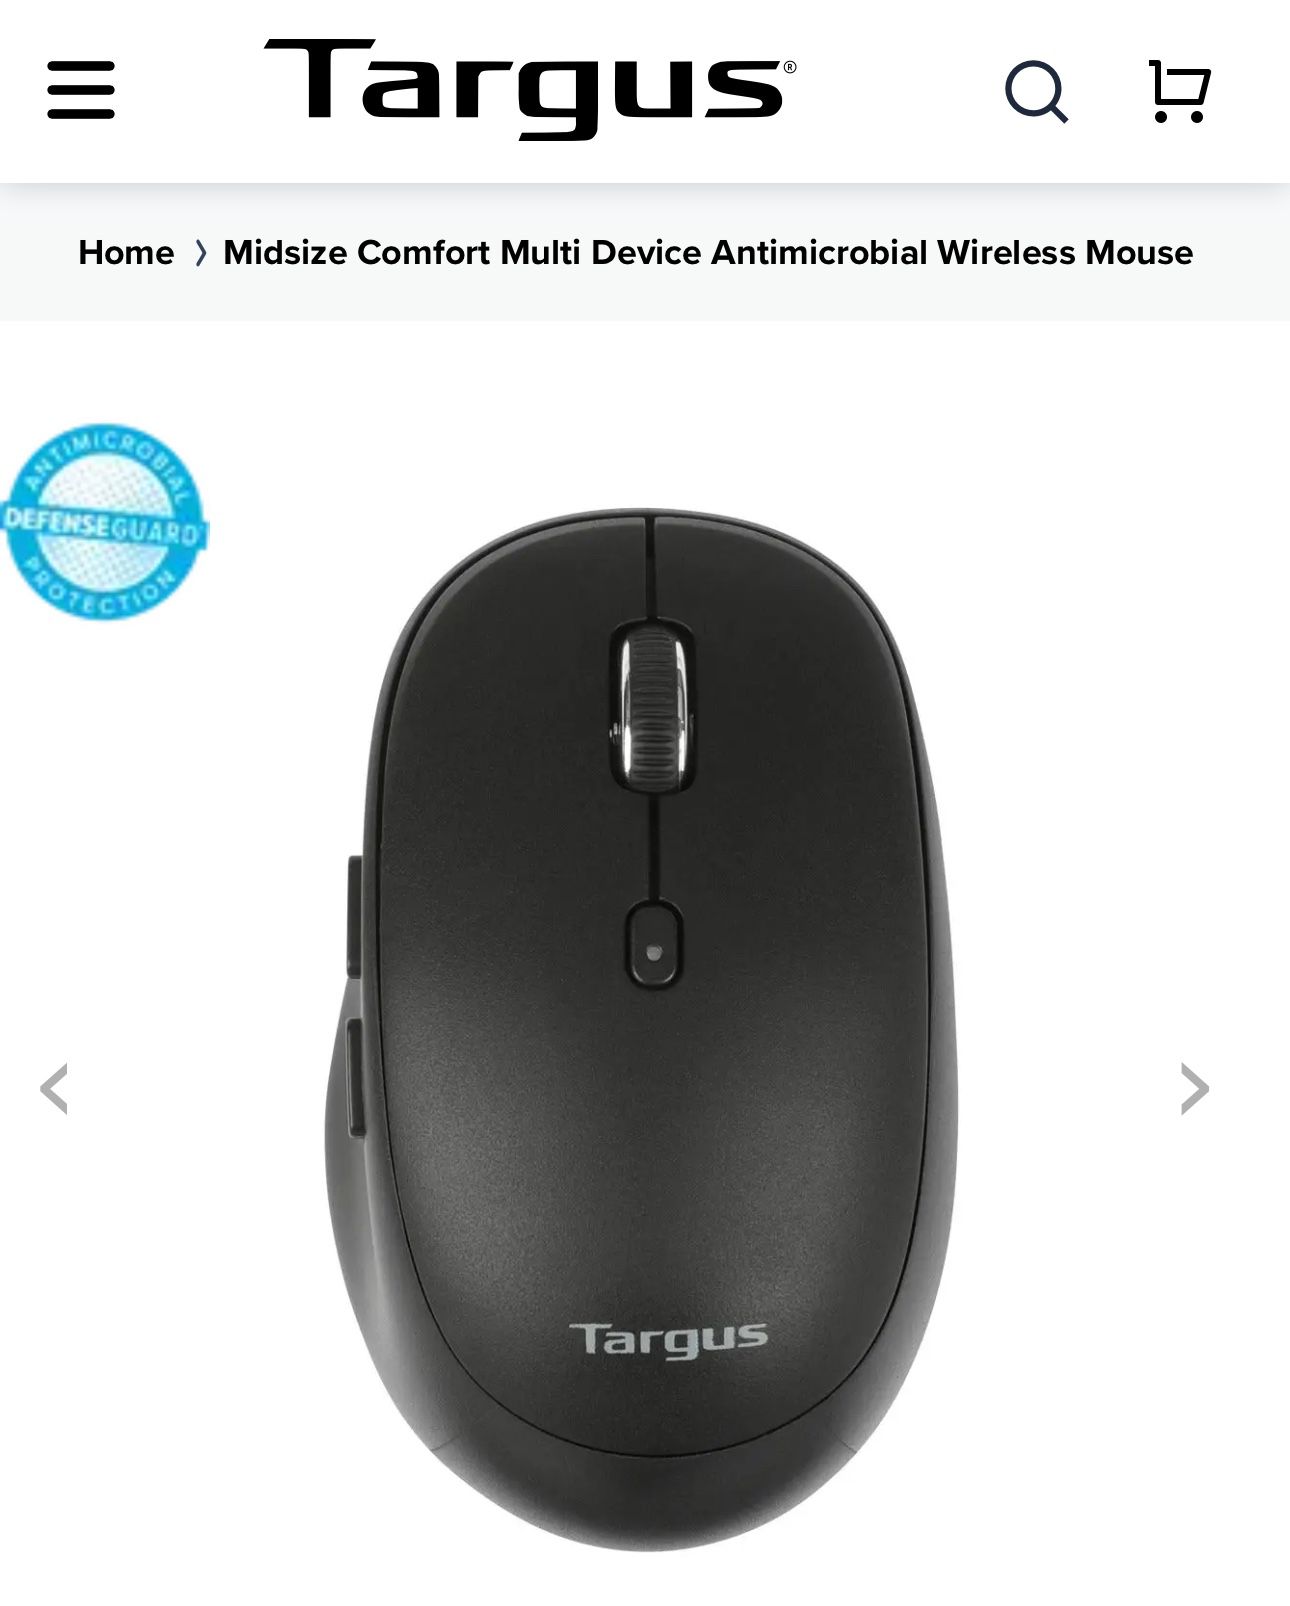 Midsize Comfort Multi-Device Antimicrobial Wireless Mouse MODEL NUMBER :AMB582GL